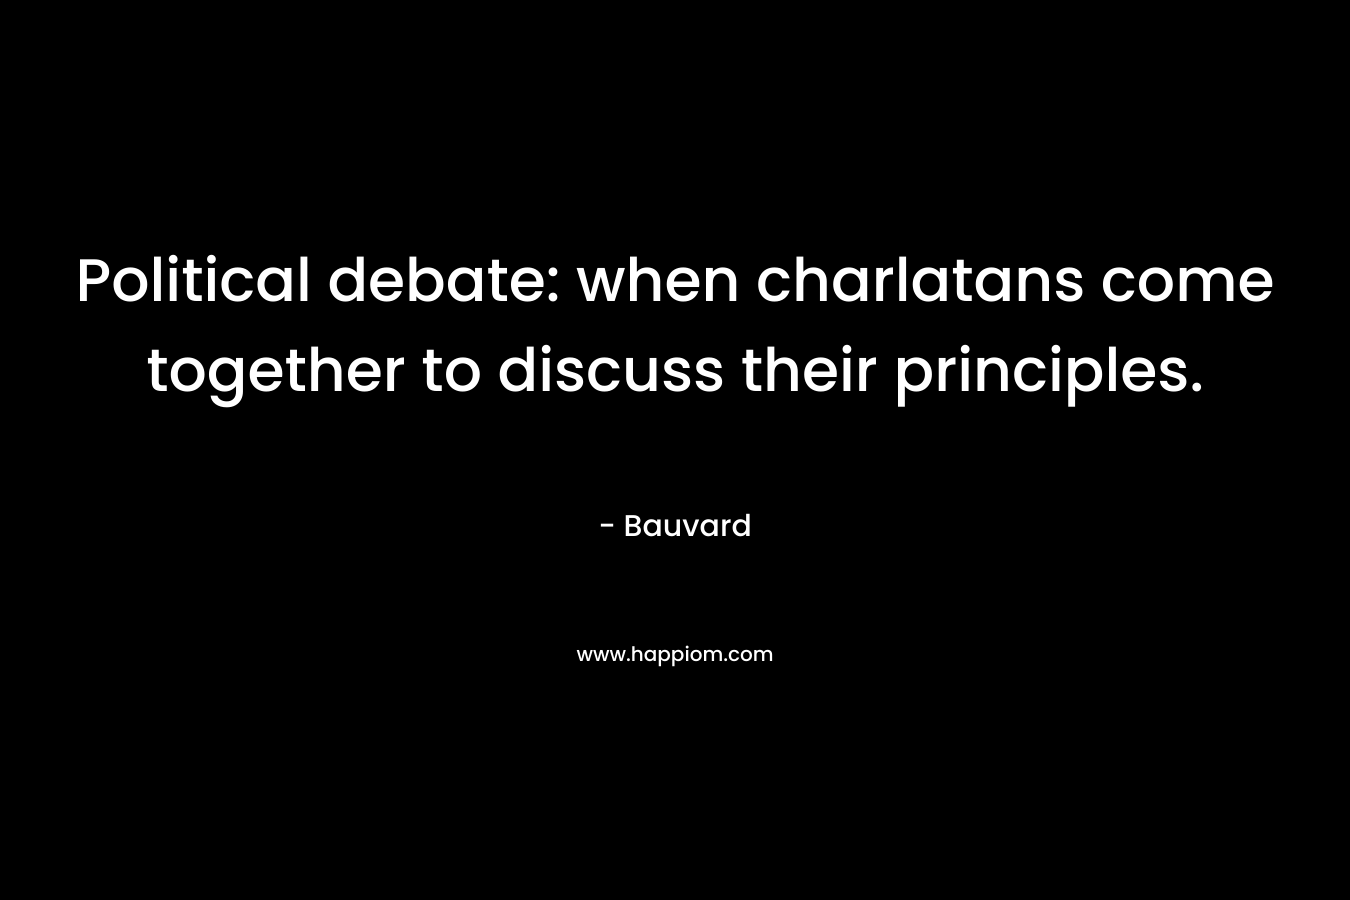 Political debate: when charlatans come together to discuss their principles.